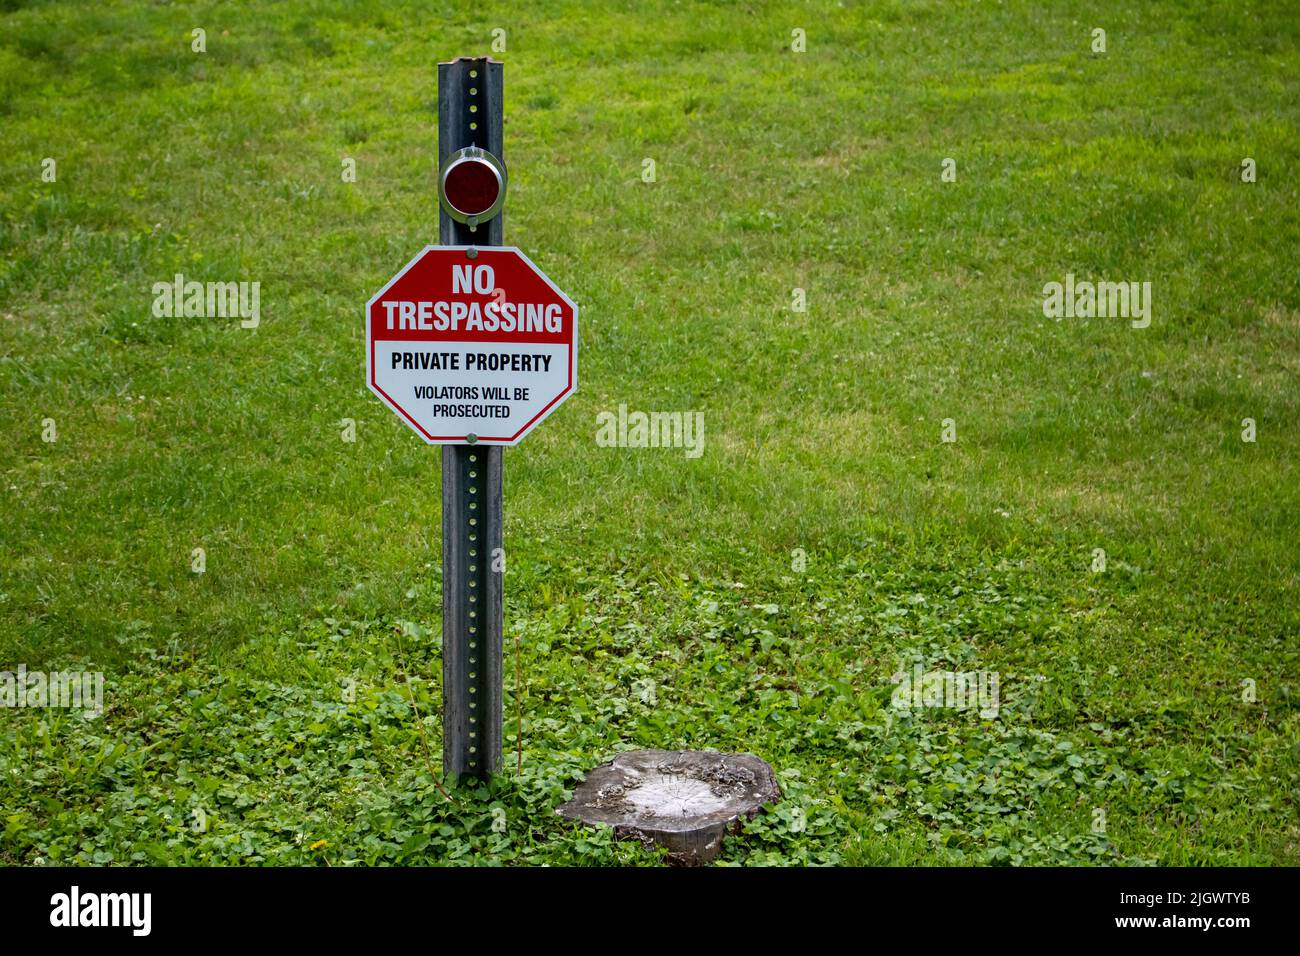 signs and symbols hexigon shapped message on a grass lawn. no trespassing  private property Stock Photo